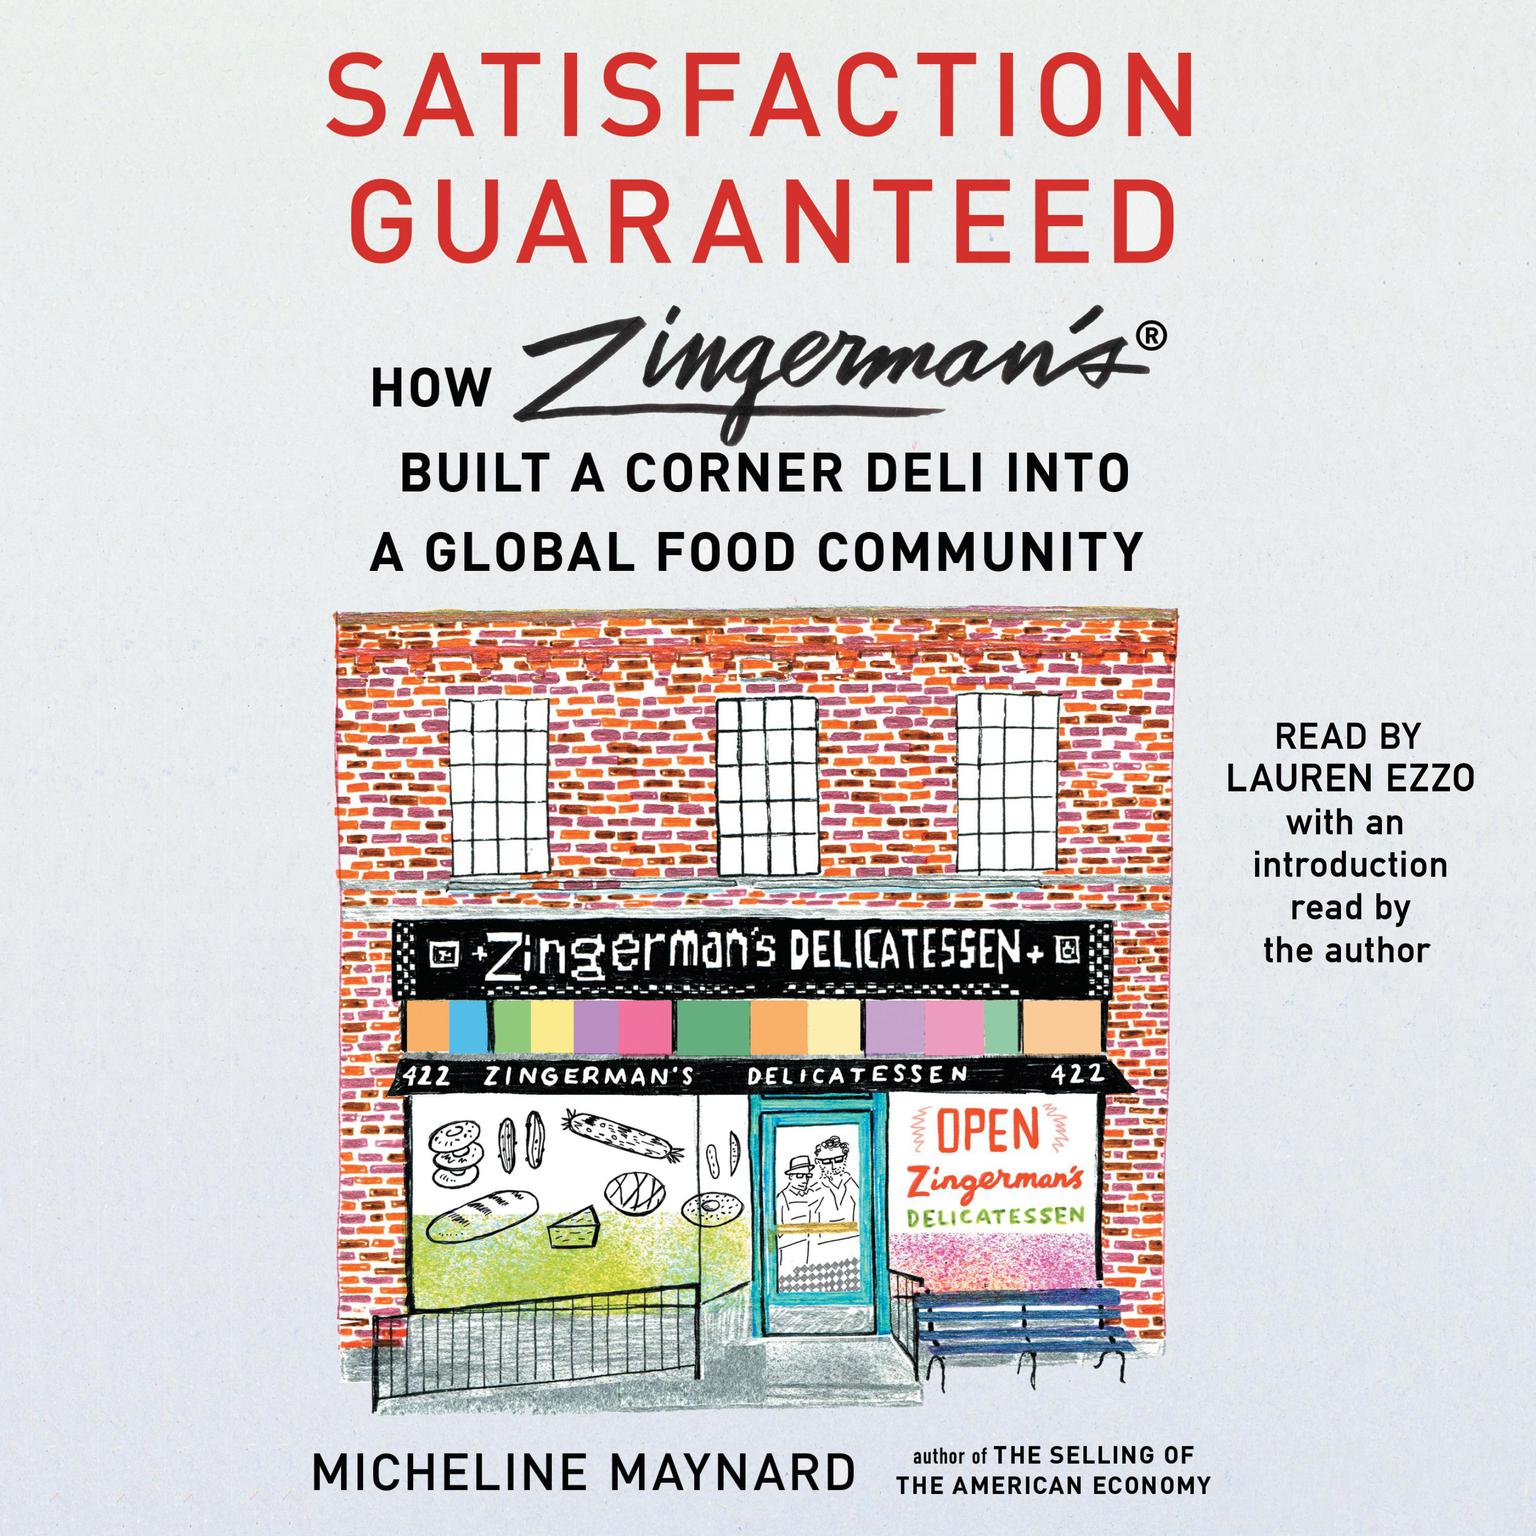 Satisfaction Guaranteed: How Zingermans Built a Corner Deli into a Global Food Community Audiobook, by Micheline Maynard